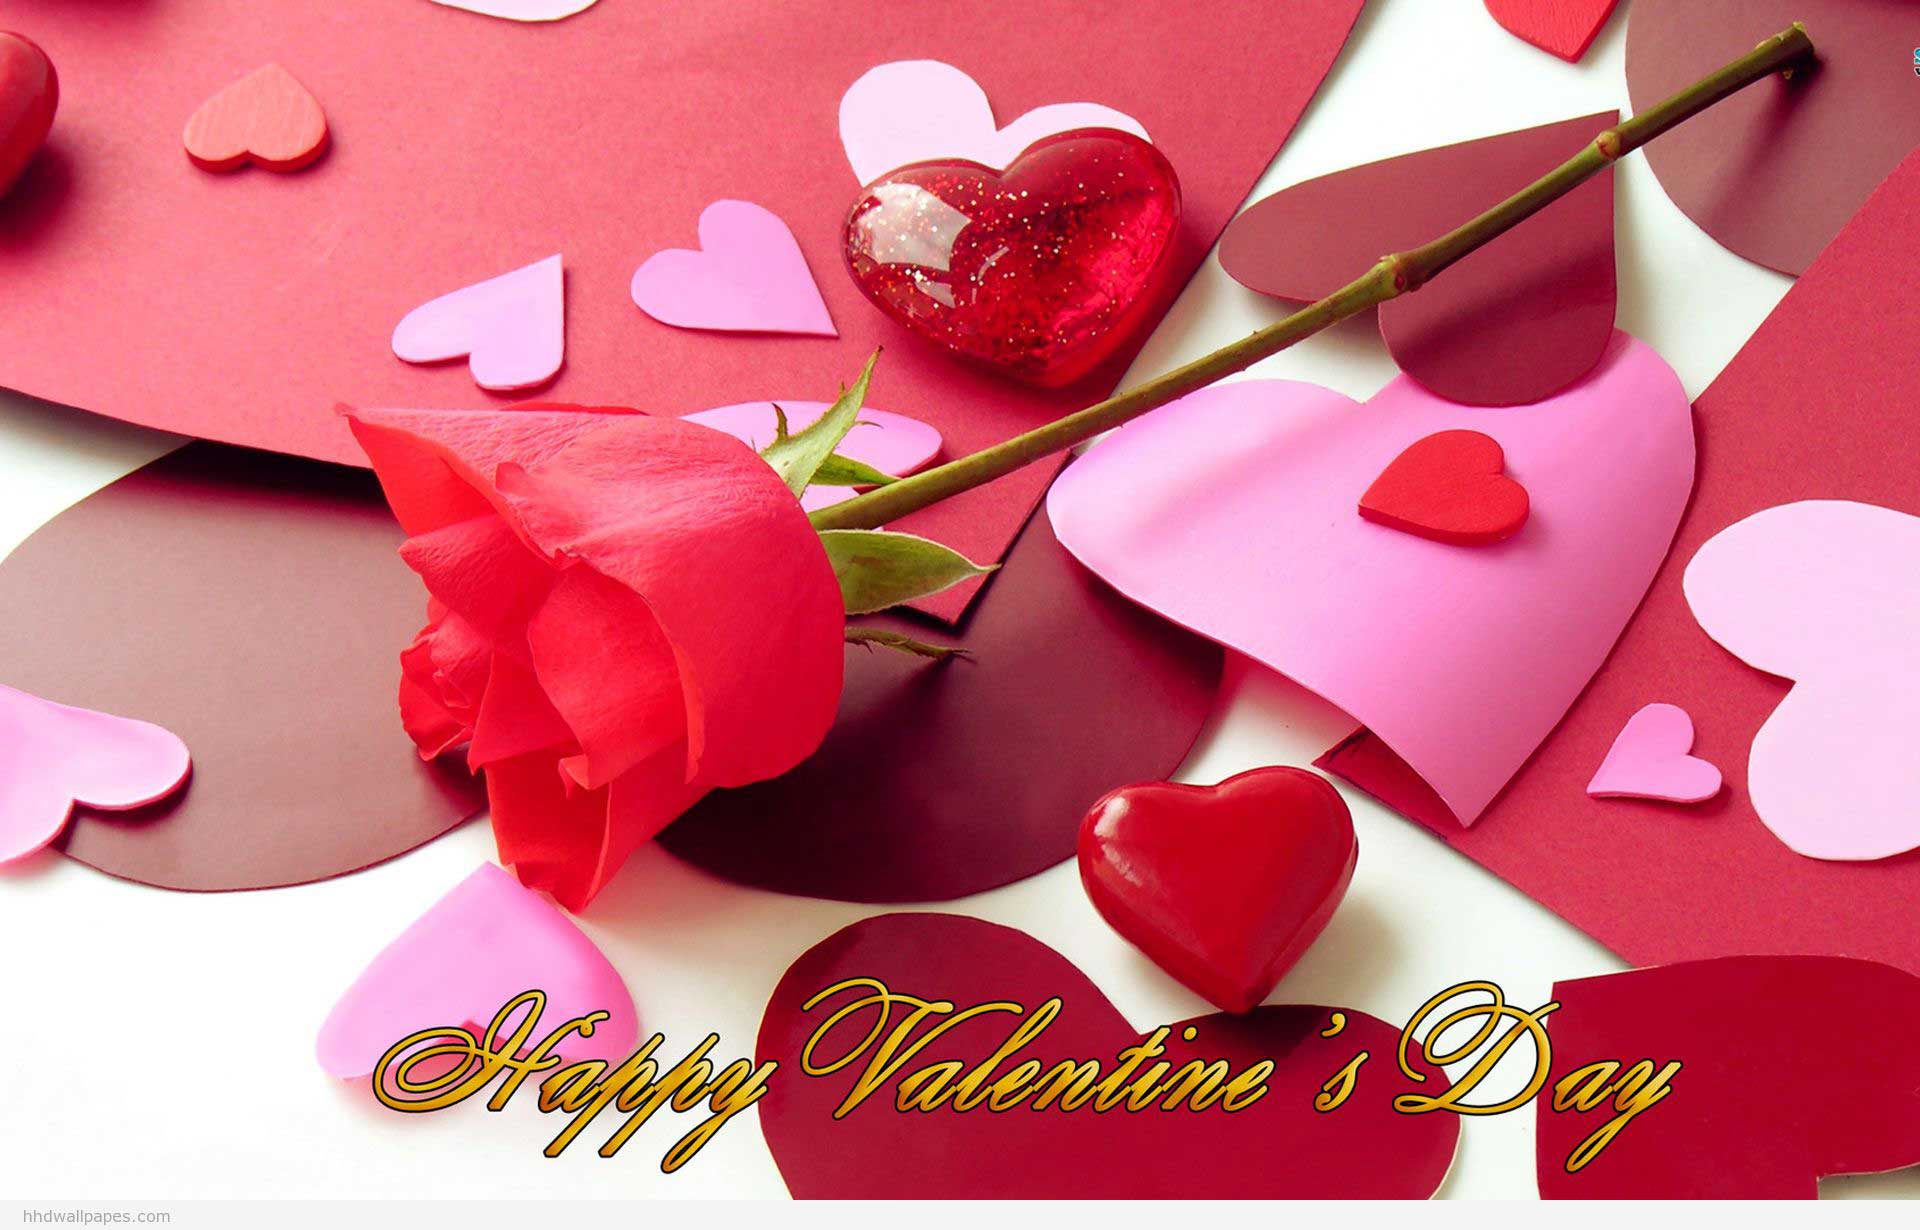 Happy-Valentines-Day-Wishes-Rose-Bud-Wallpaper